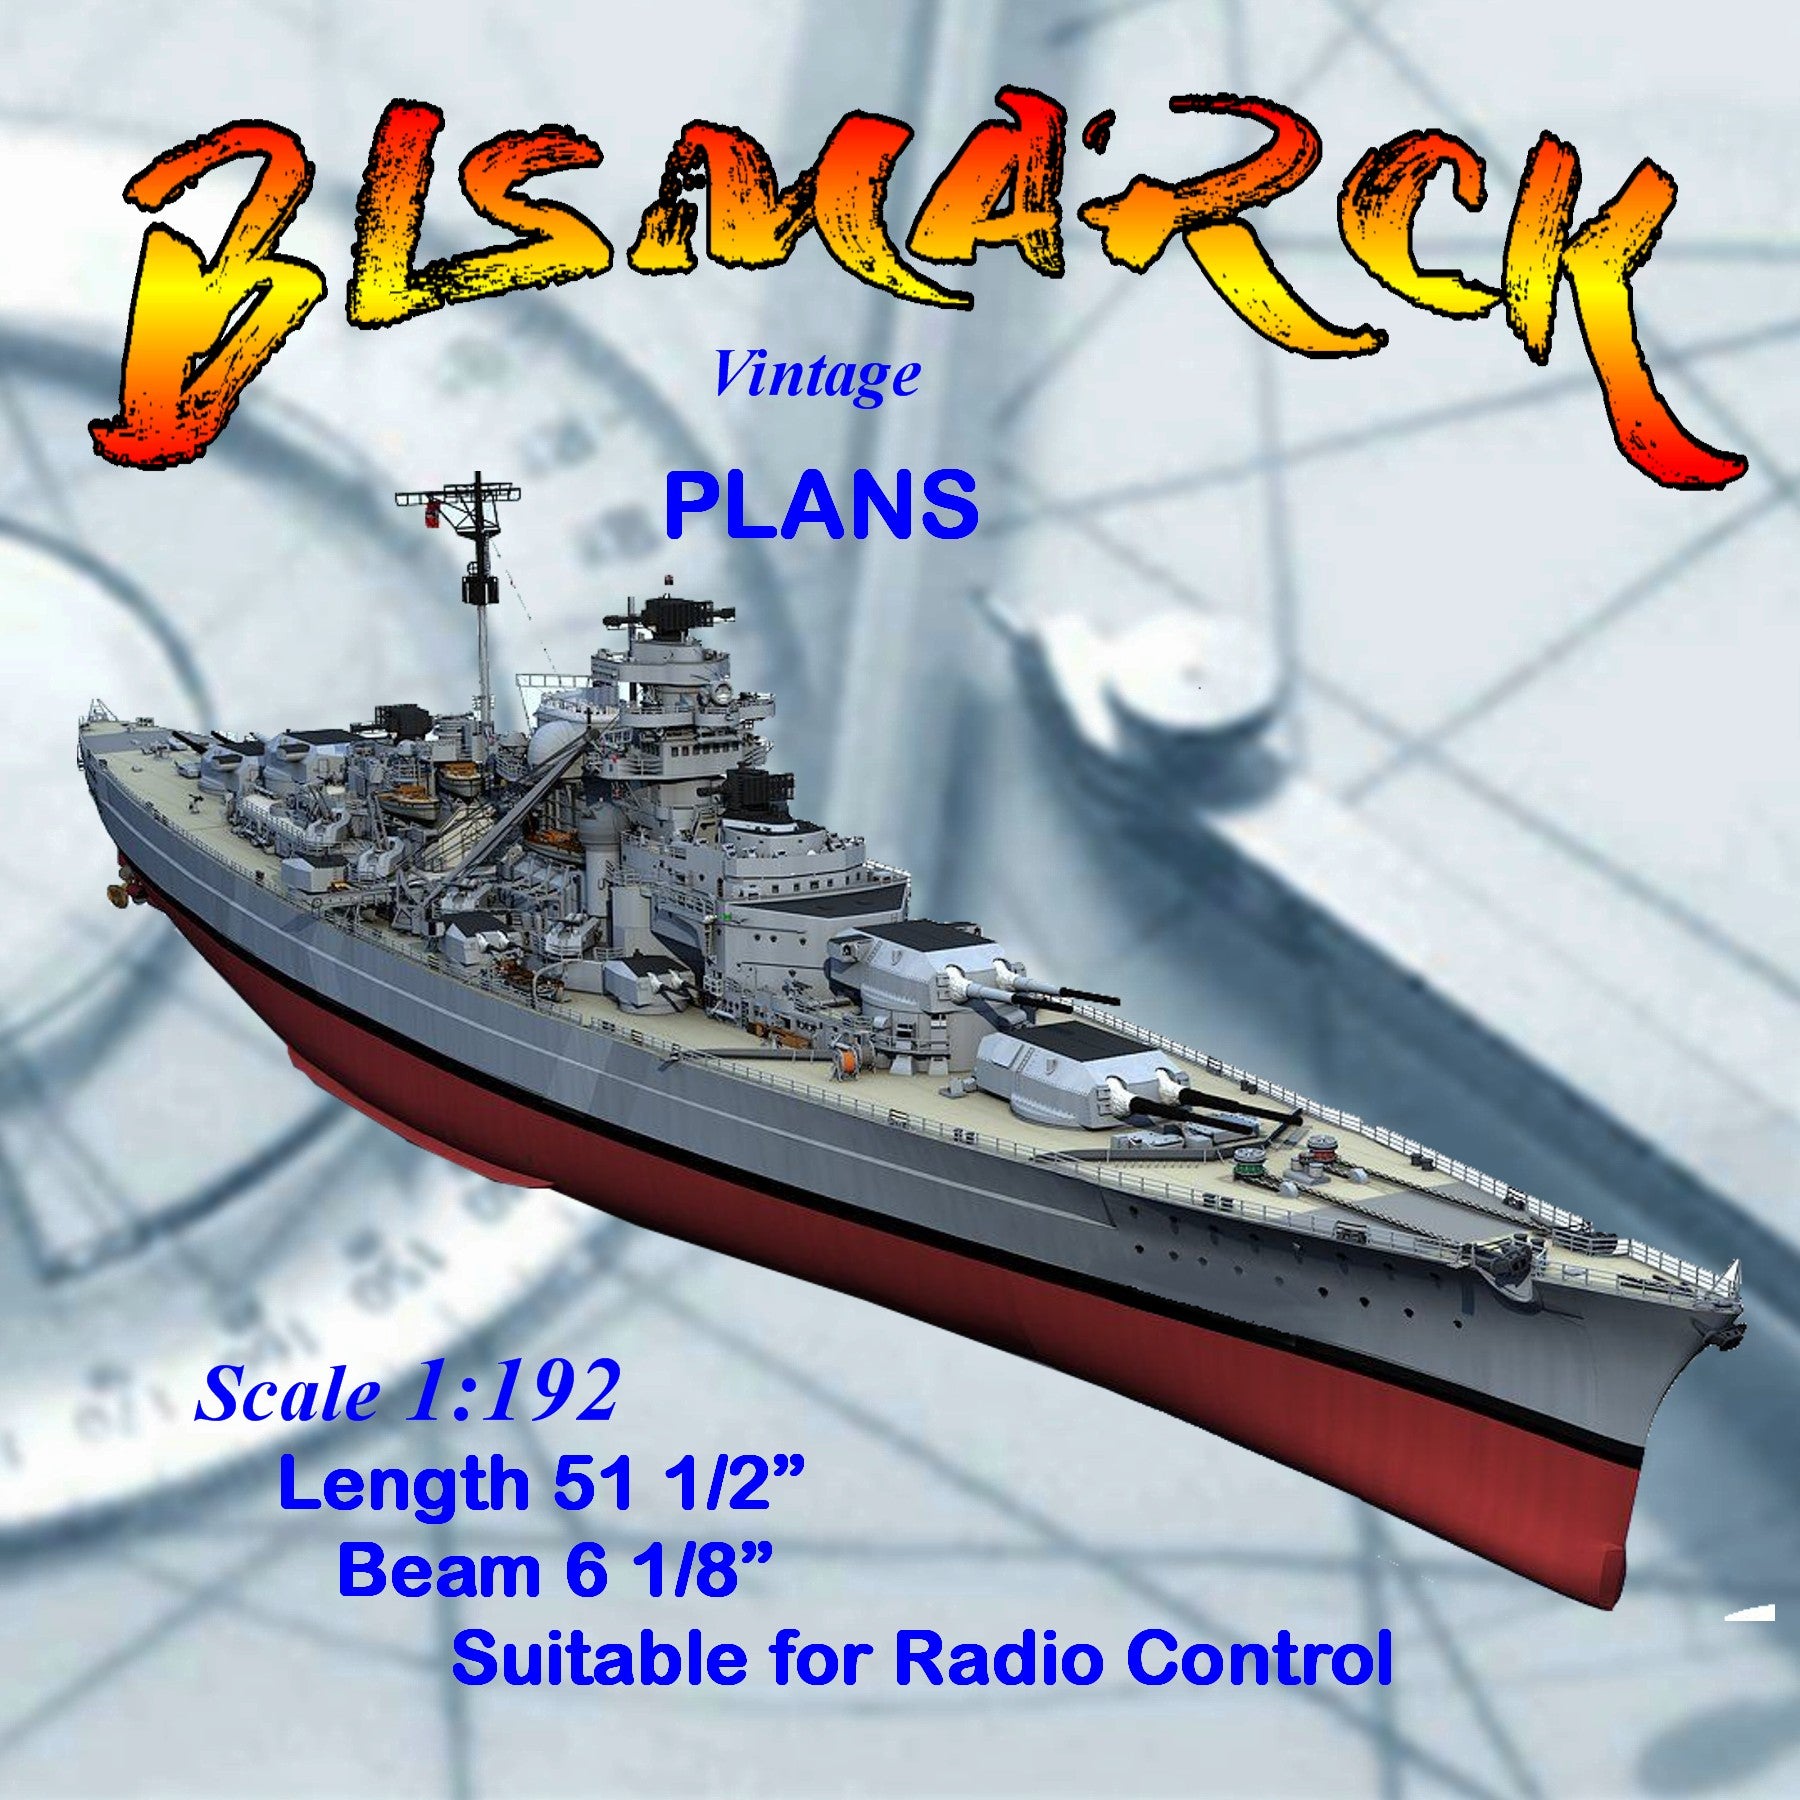 full size printed plans scale 1:192 tirpitz class bismarck suitable for multi channel radio control